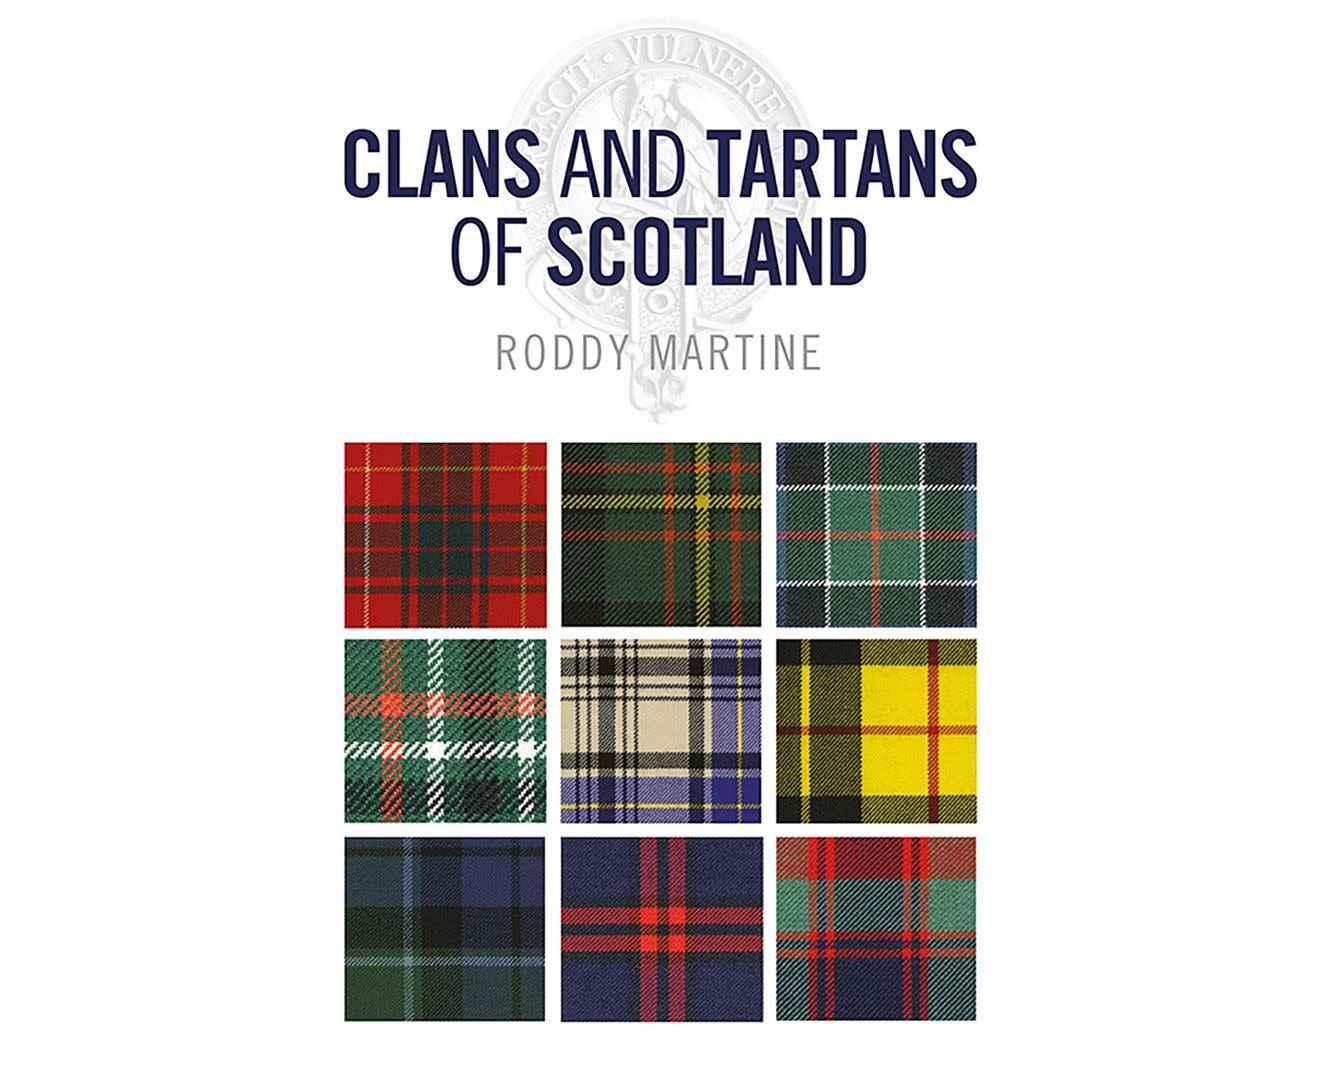 Book: Clans and Tartans of Scotland